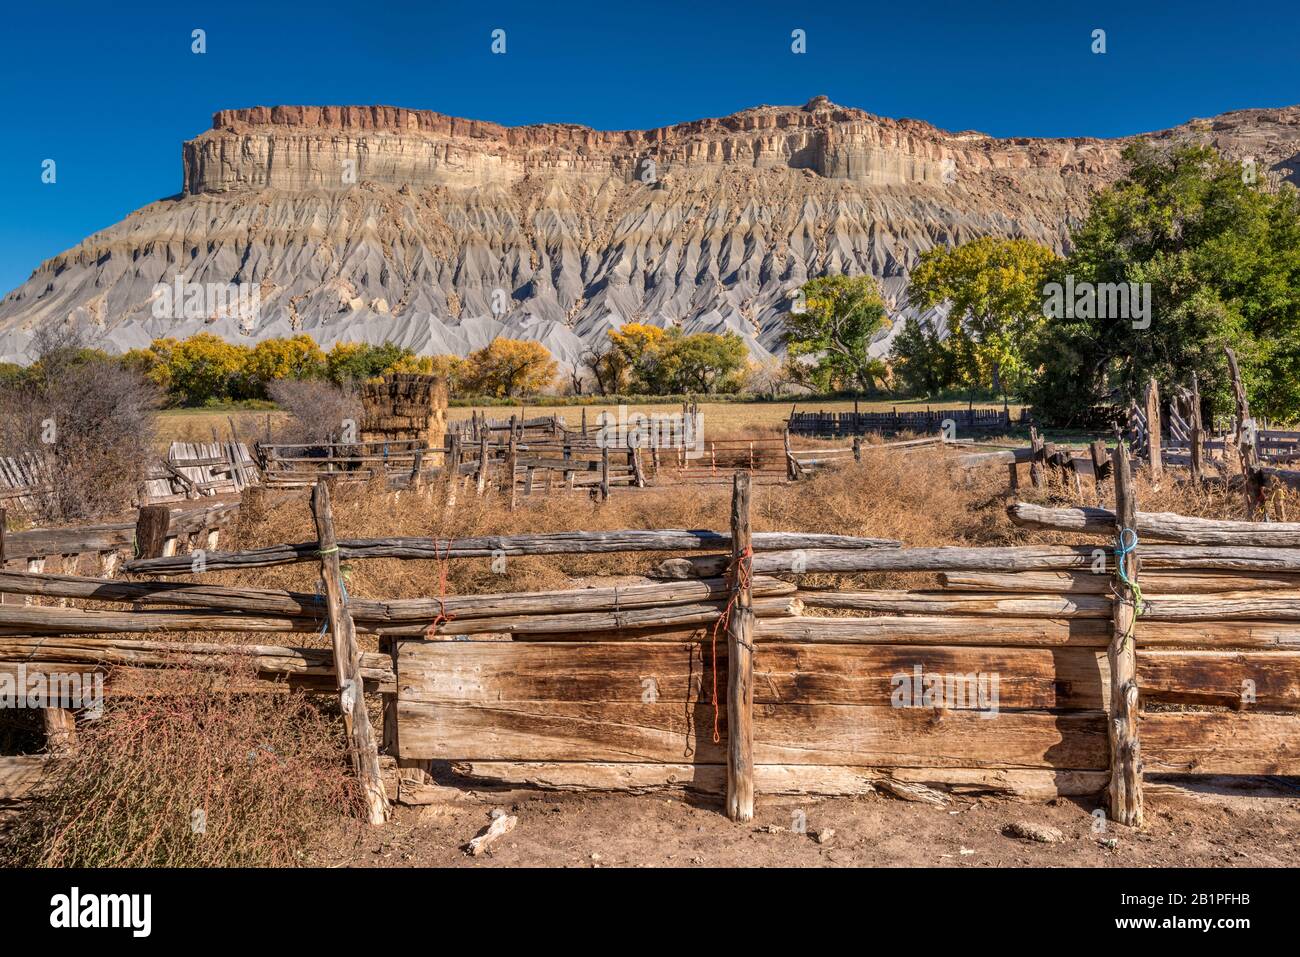 Abandoned corral near Fremont River, South Caineville Mesa in Upper Blue Hills behind, near Capitol Reef National Park, Utah, USA Stock Photo